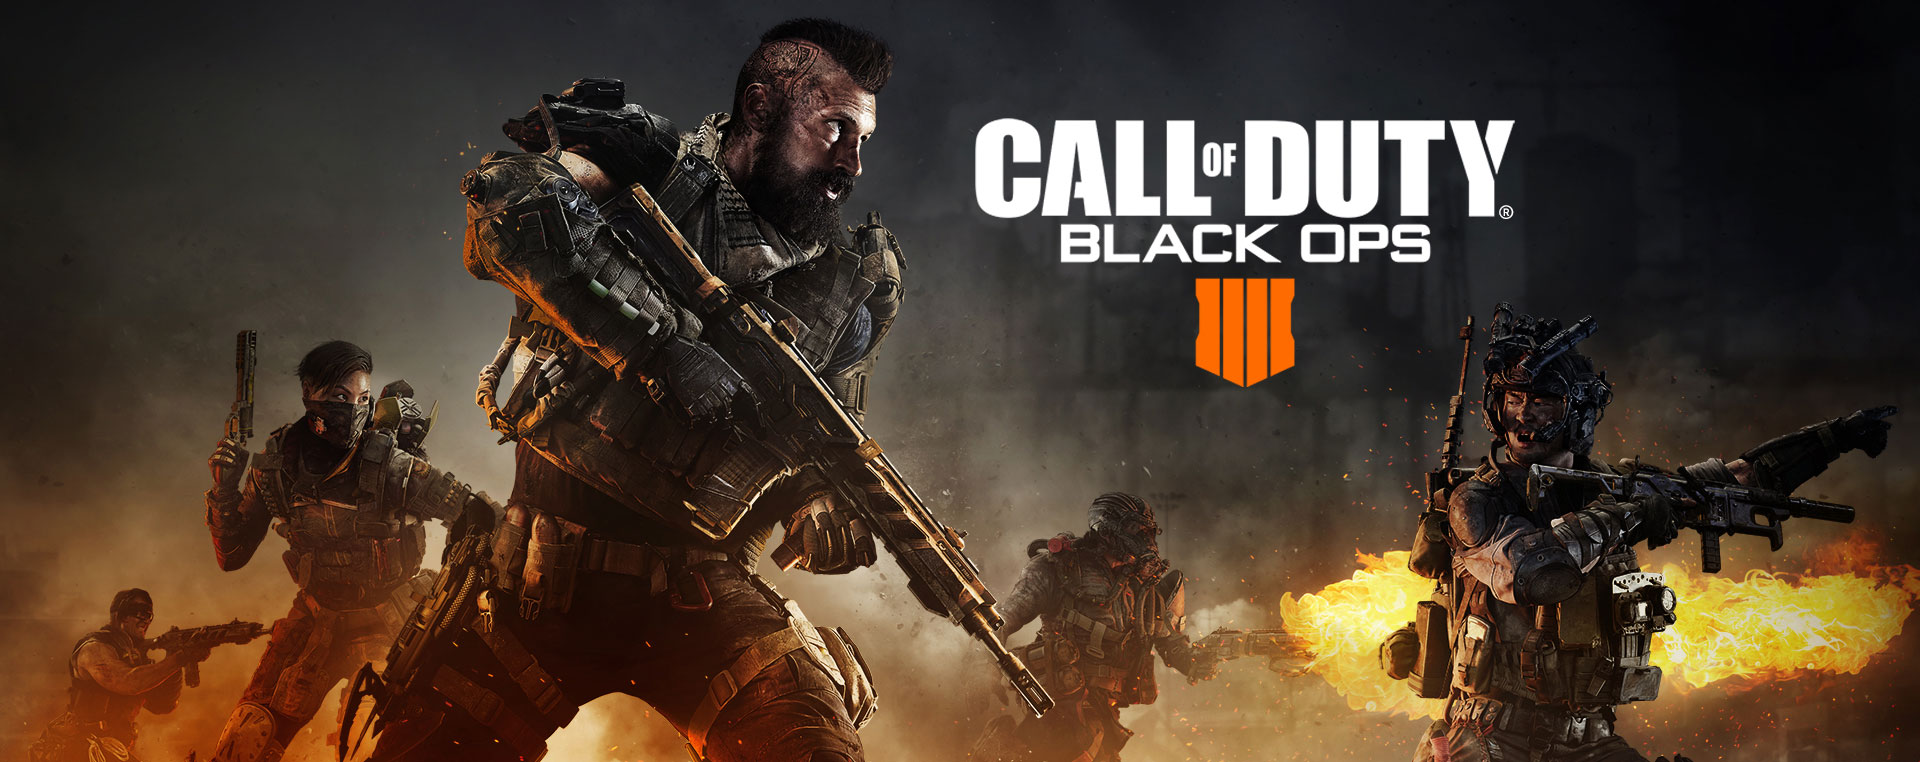 xbox one call of duty black ops 4